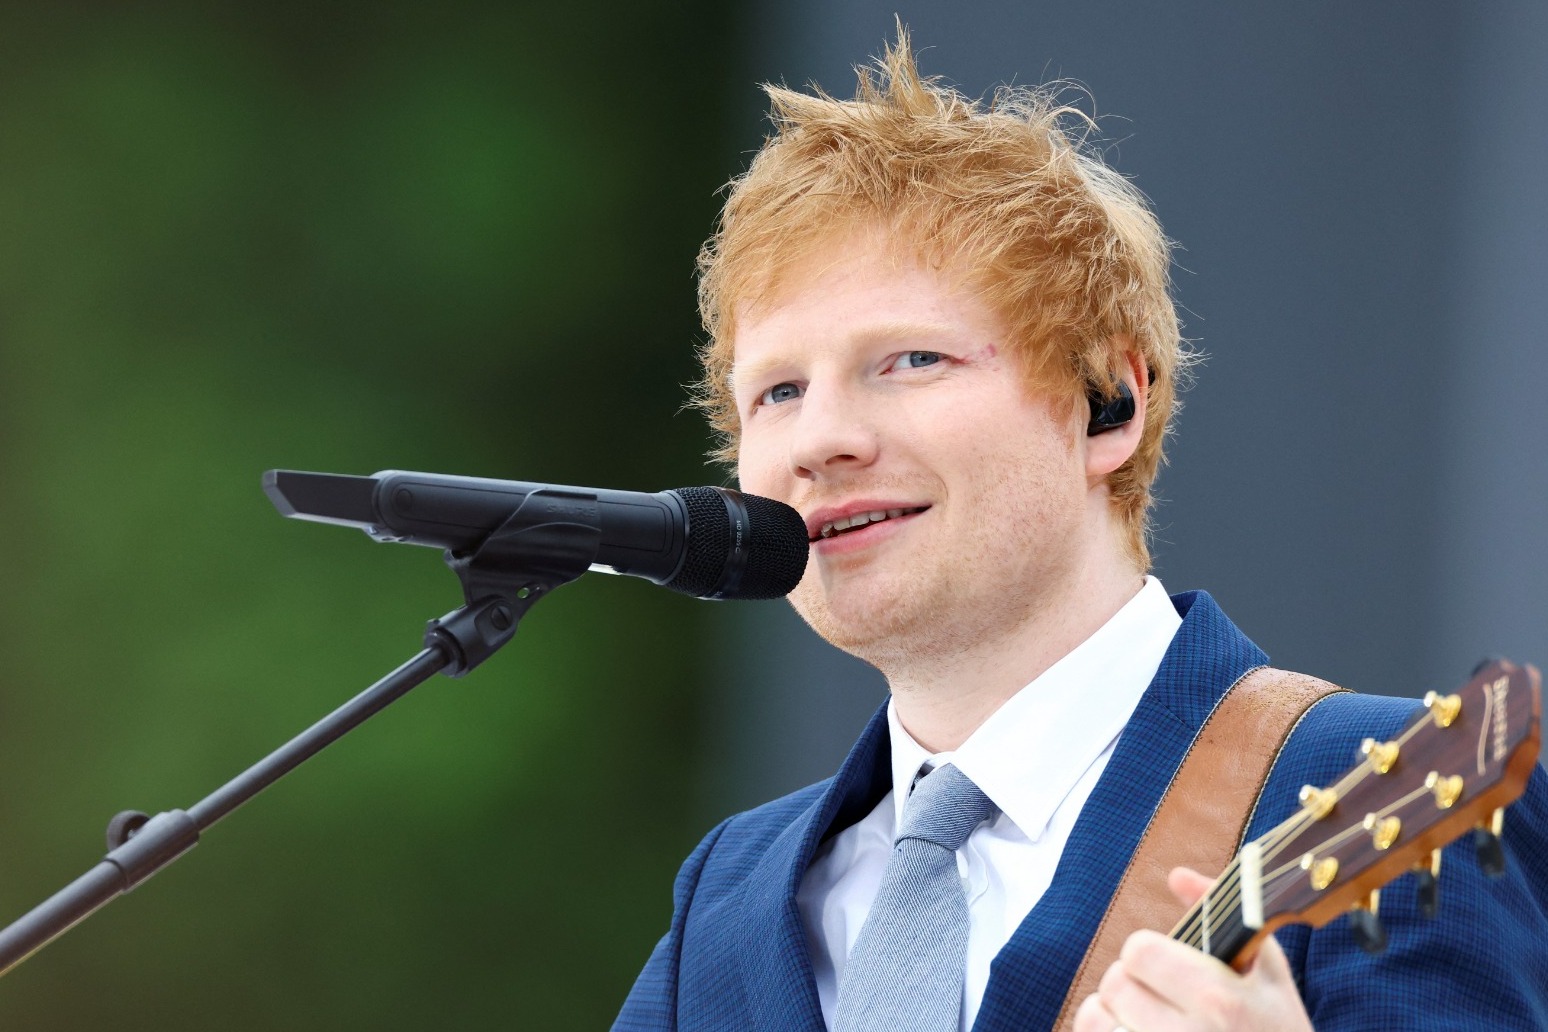 Ed Sheeran joined by Ukrainian band for live debut of collaborative track 